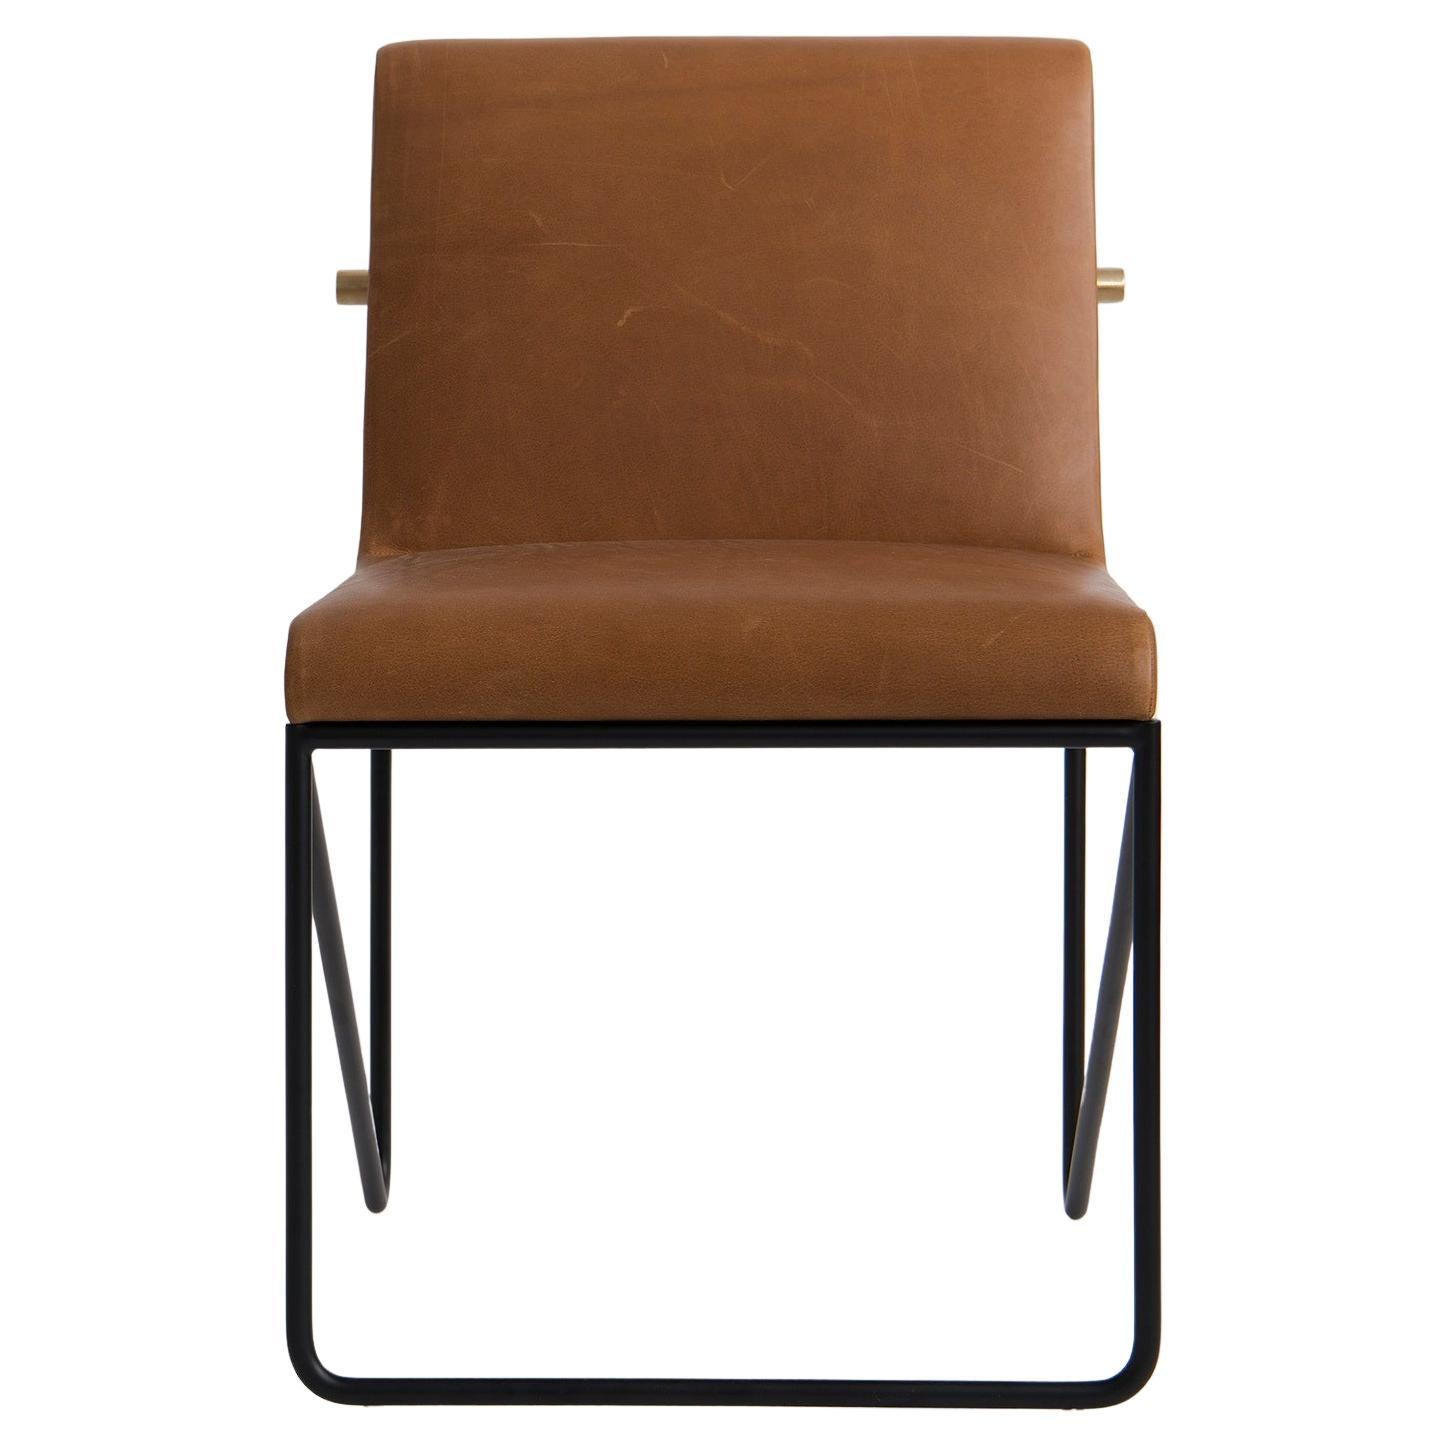 Kickstand Armless Side Chair by Phase Design